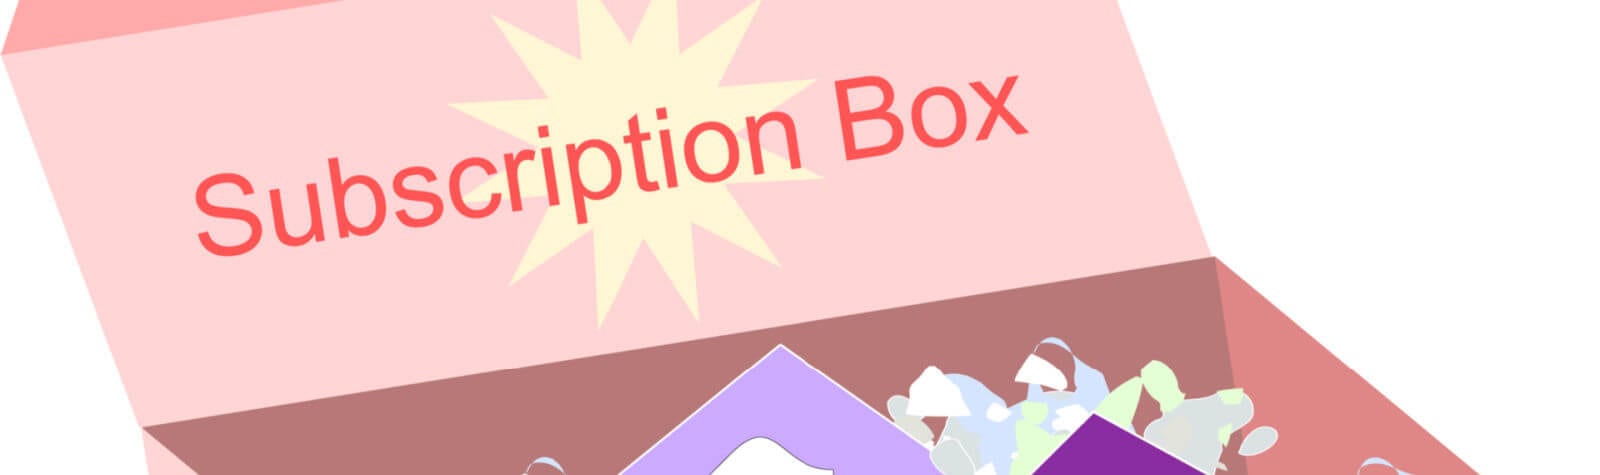 Subscription Box Marketing: 6 Ways to Get More Sign Ups